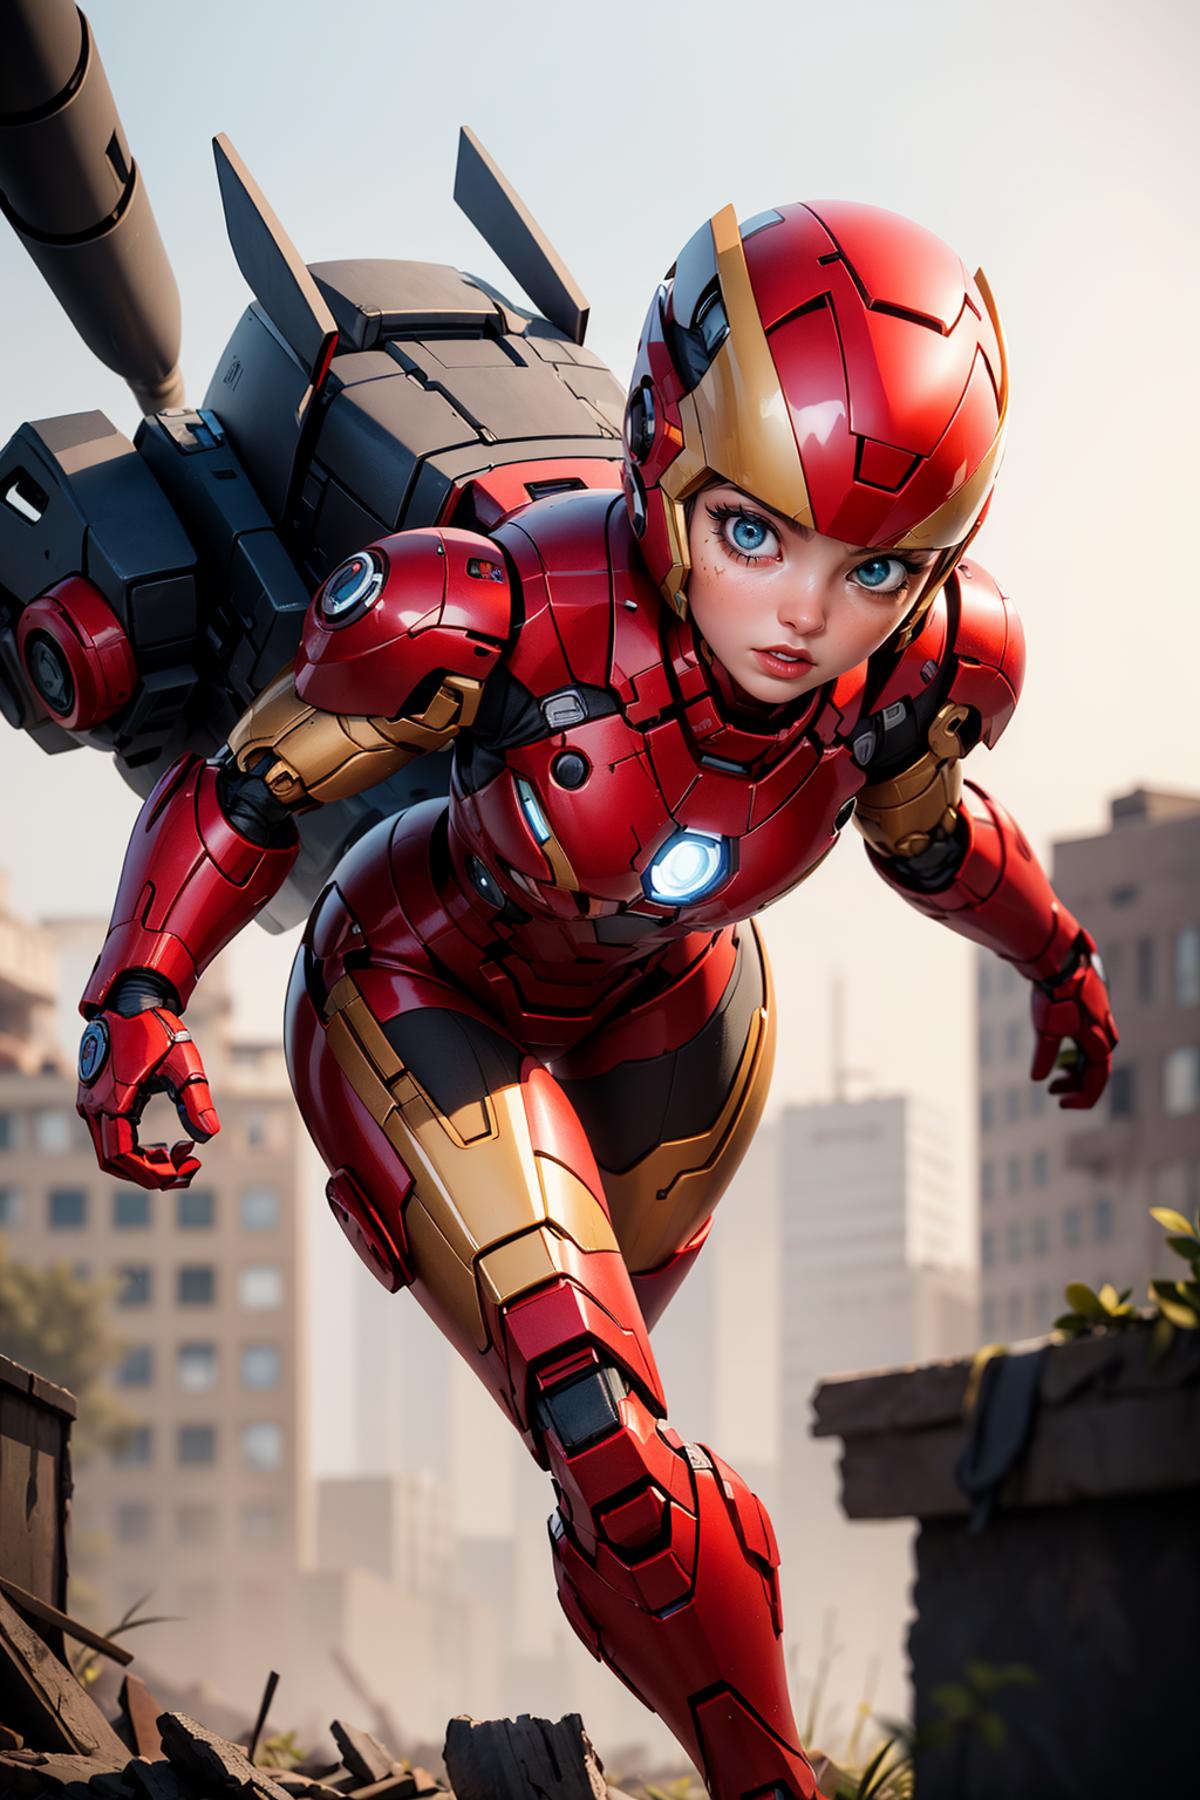 A 3D model of a female Iron Man character, wearing a red suit and standing on a building.